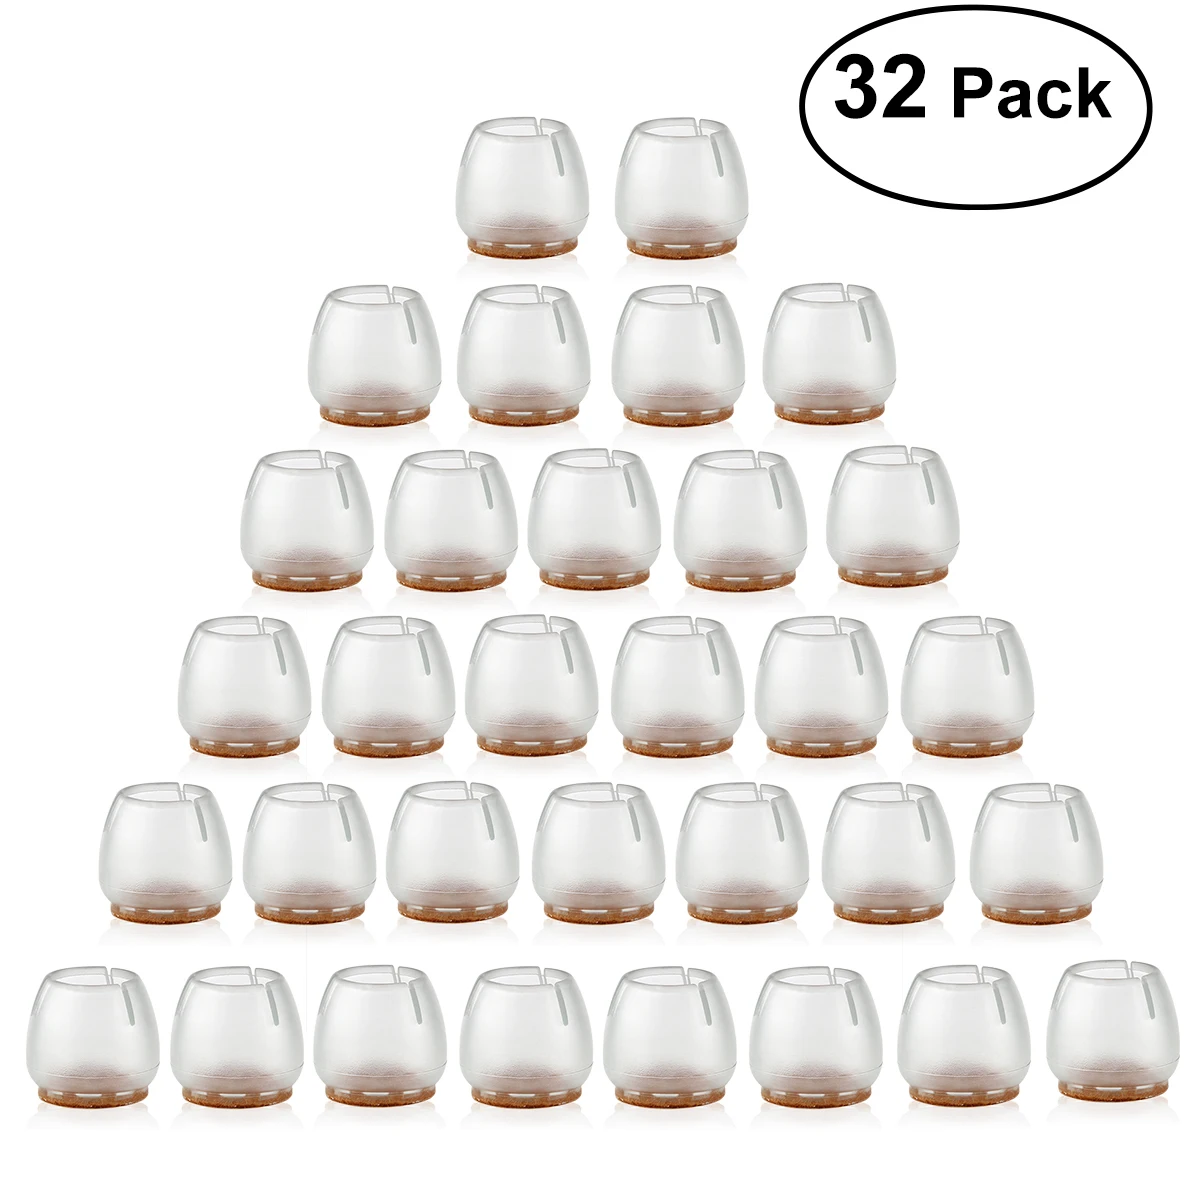 32 Pack Chair Leg Caps Silicone Floor Protector Round Furniture Table Feet for sale online 